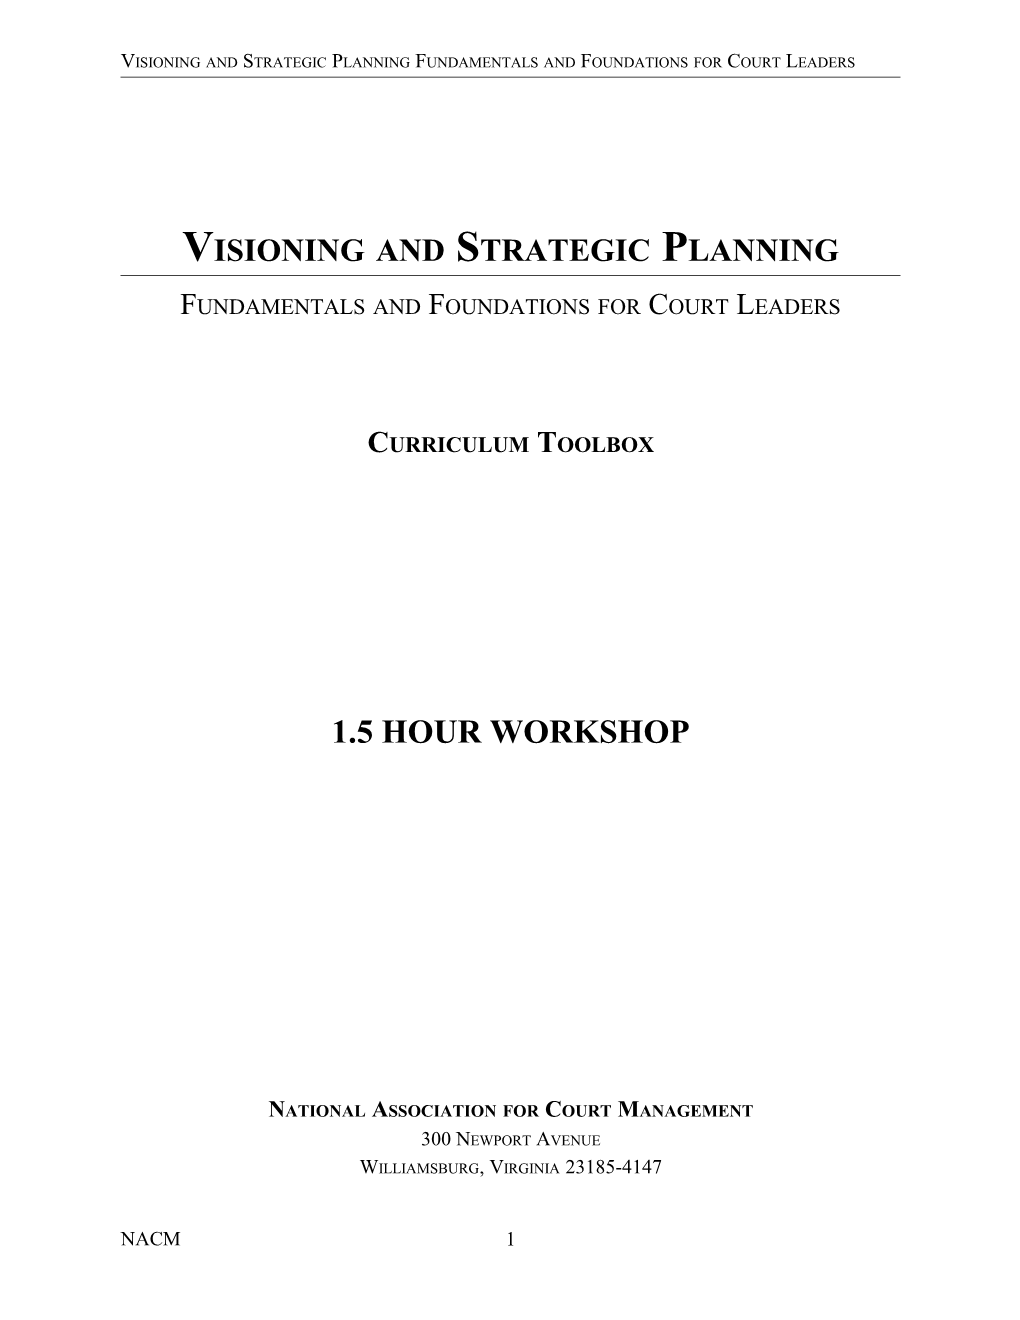 Visioning and Strategic Planning Fundamentals and Foundations for Court Leaders